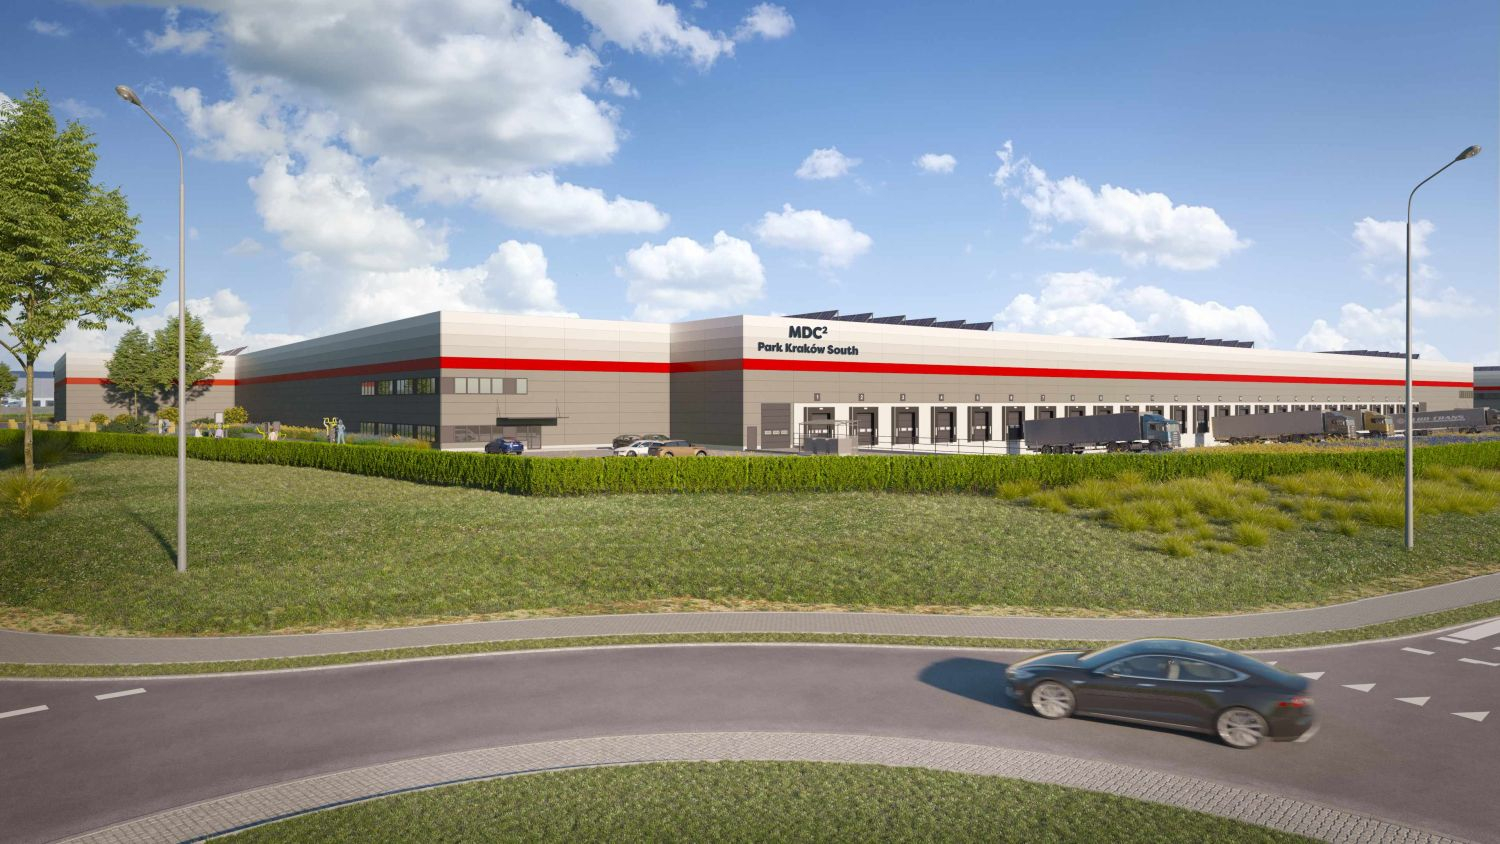 News Article Generali Real Estate investment MDC2 Poland warehouse